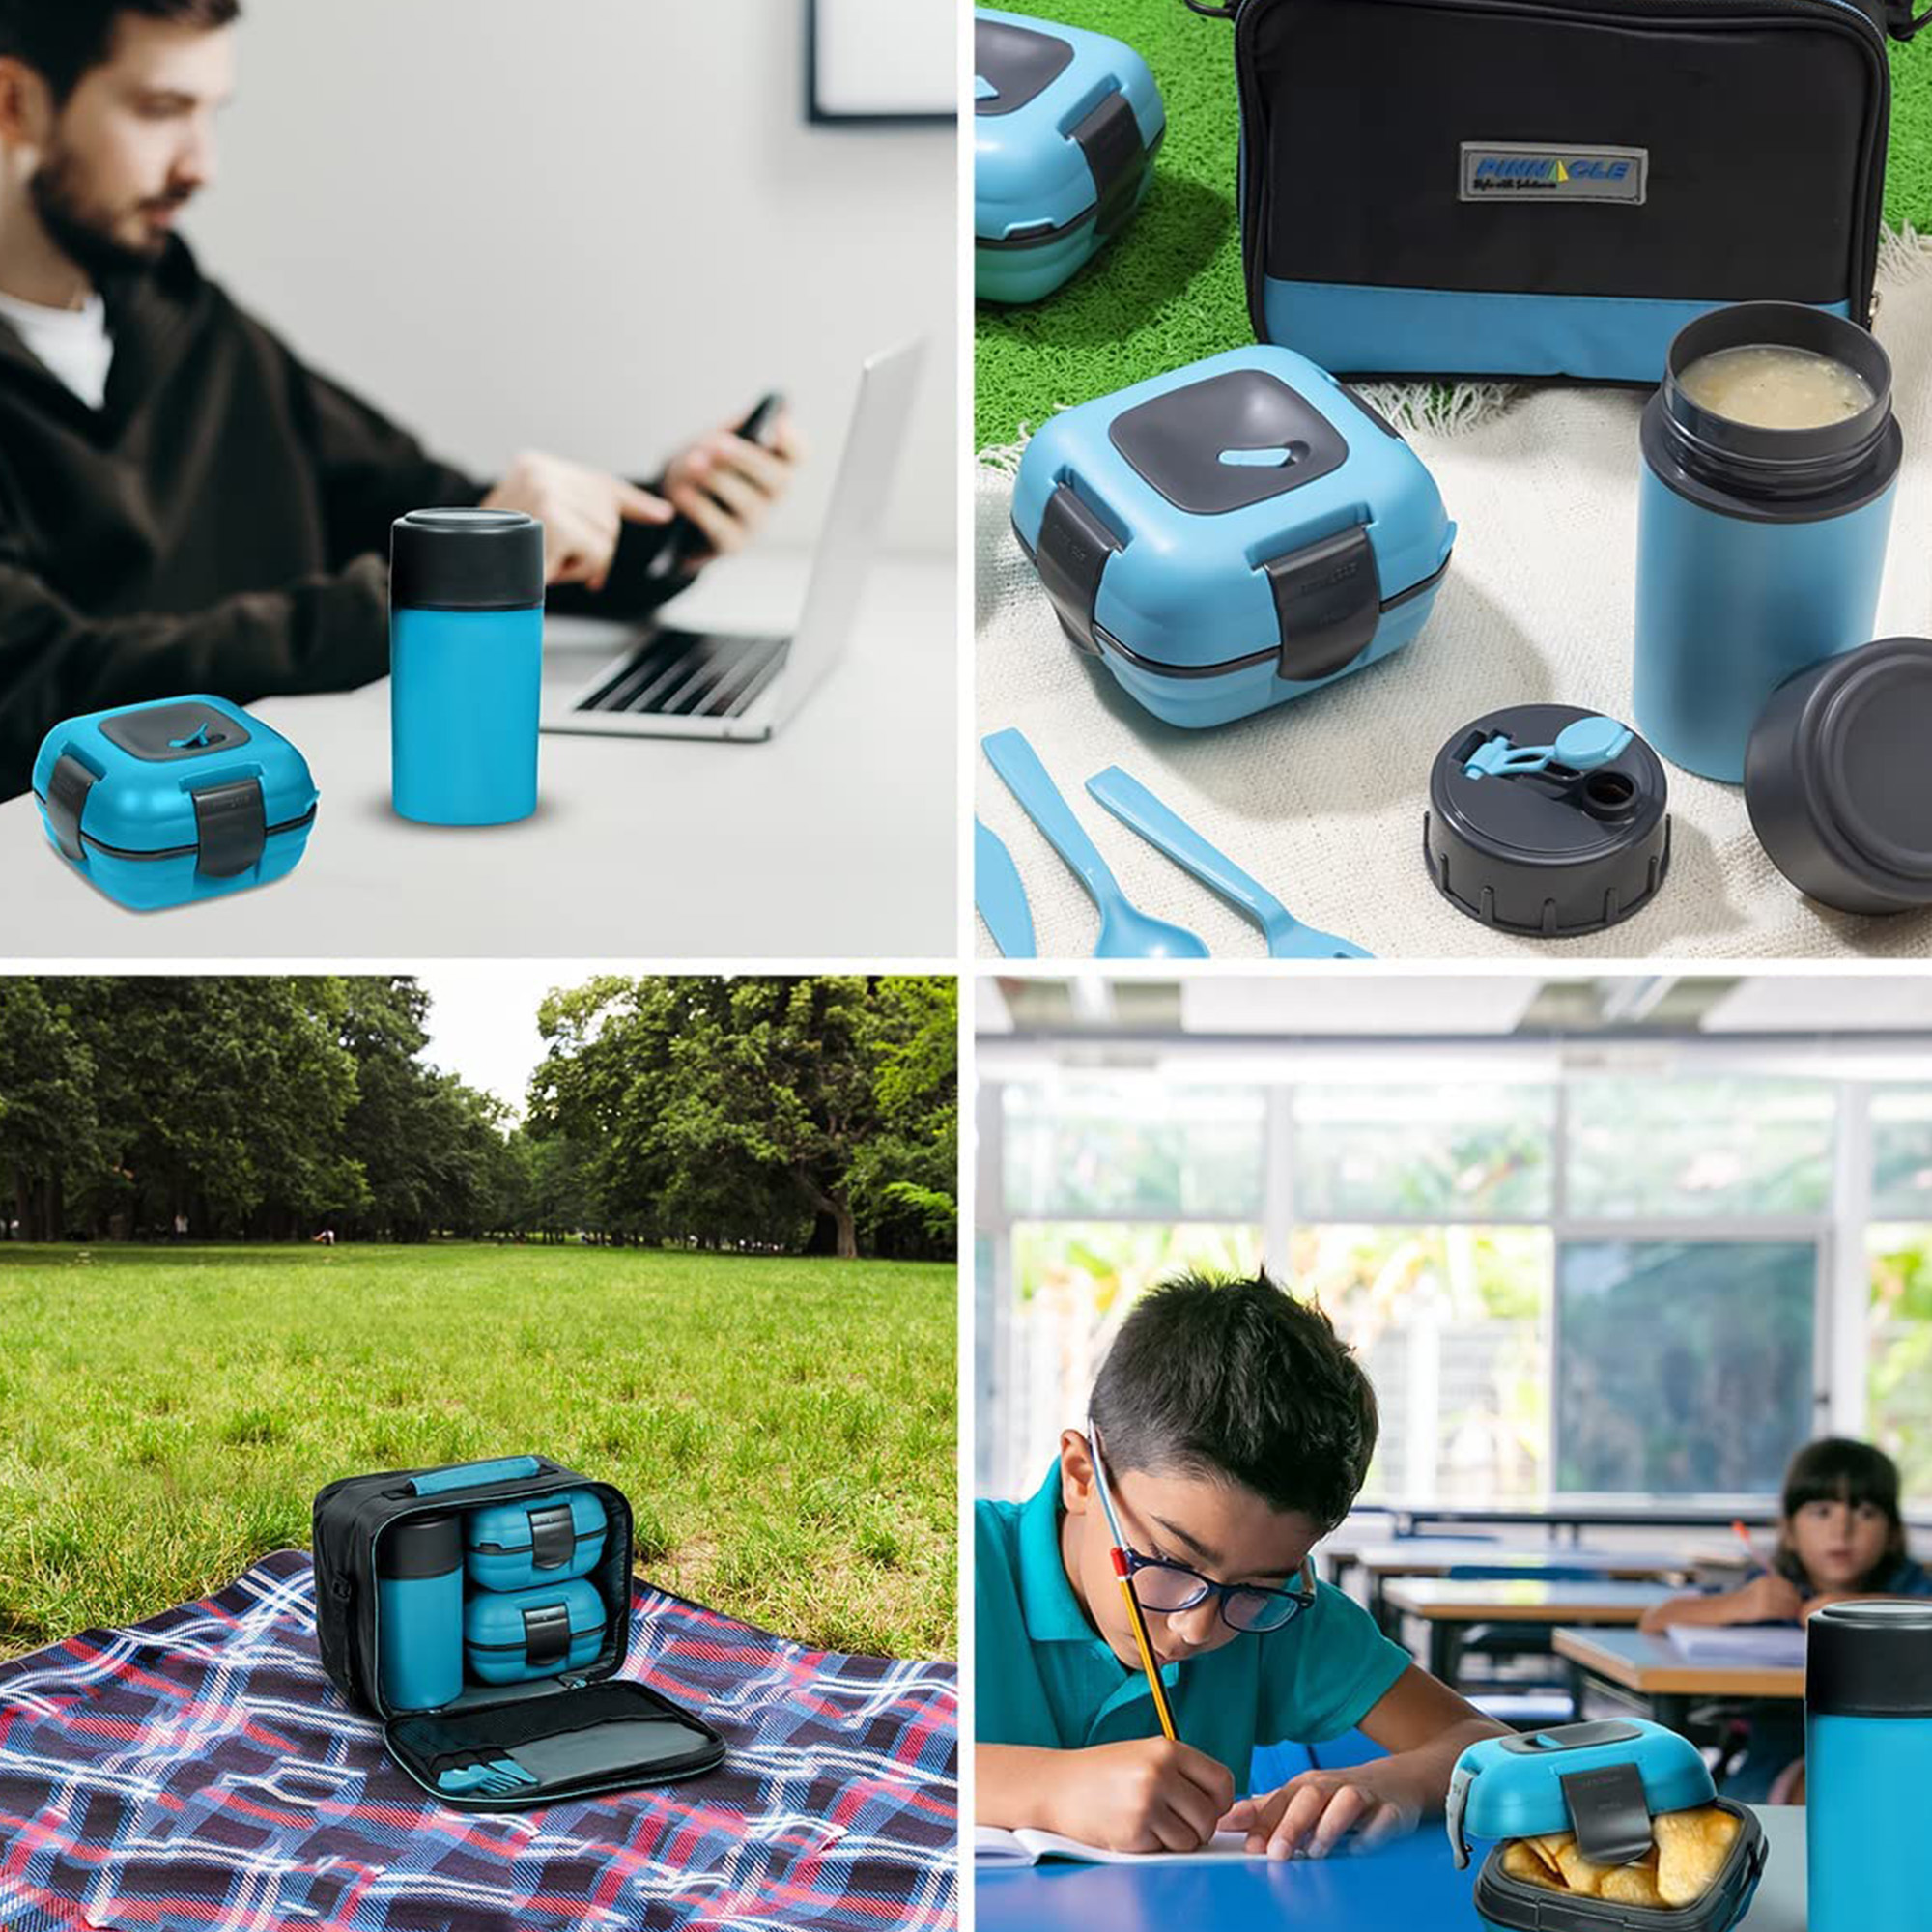 Pinnacle Thermoware Thermal Lunch Box Set Lunch Containers for Adults & Kids, Blue - image 4 of 9